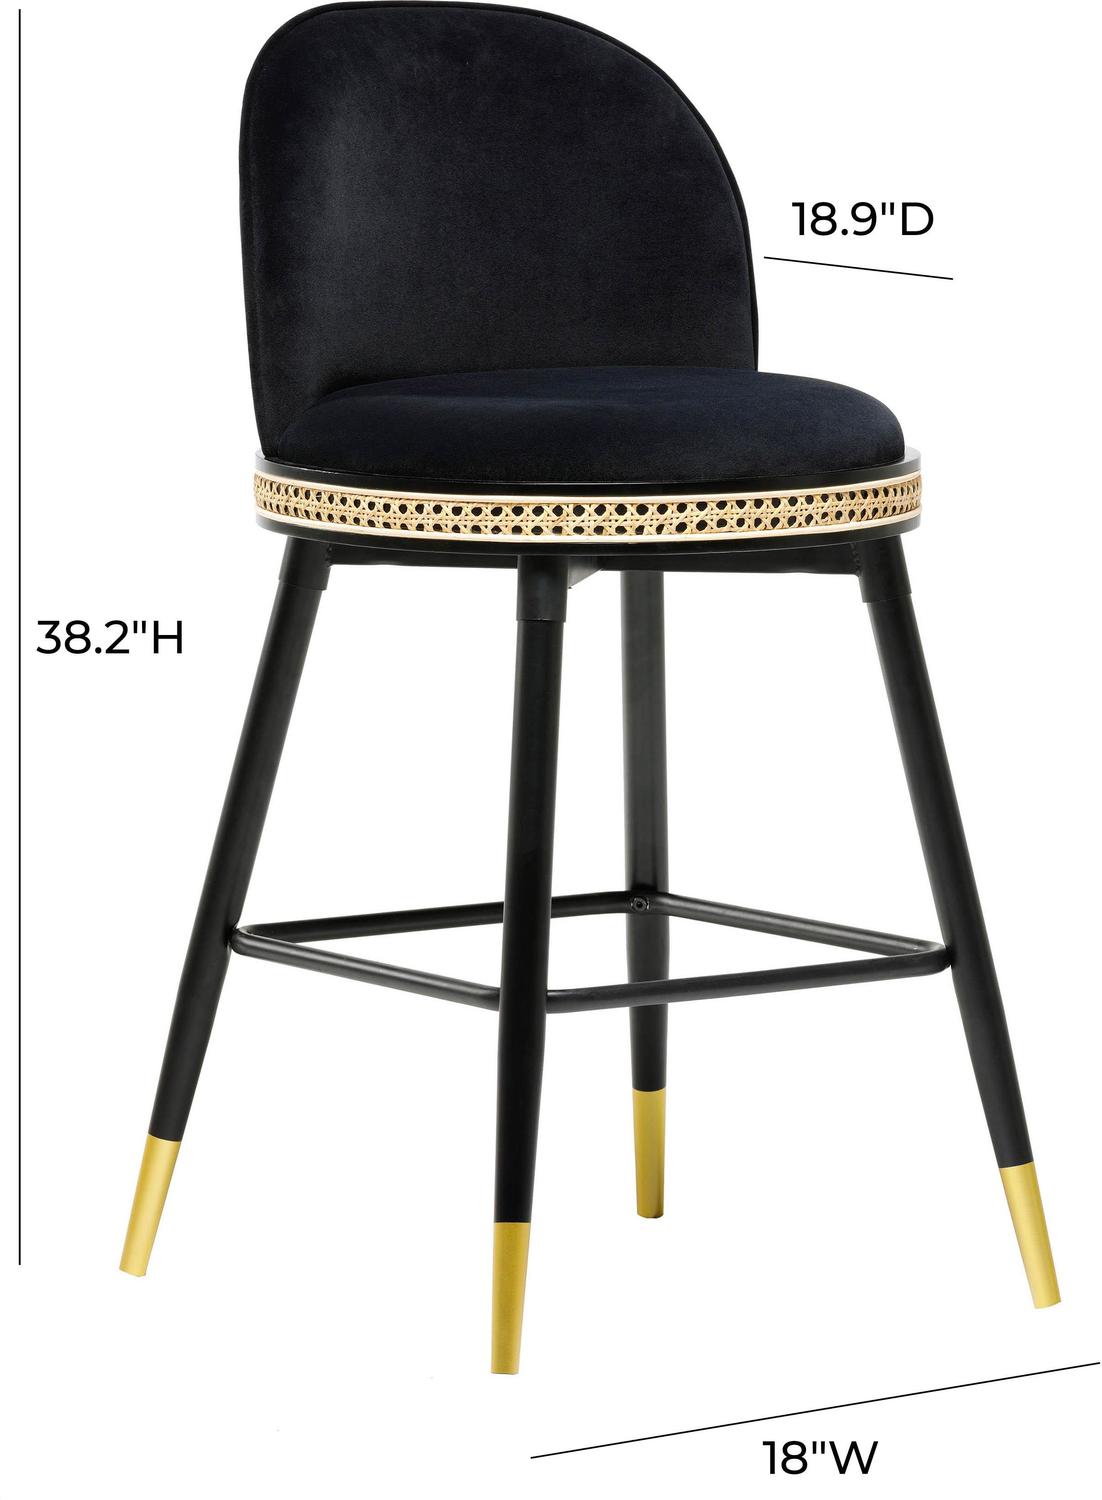 outdoor bar stools with arms Contemporary Design Furniture Stools Black